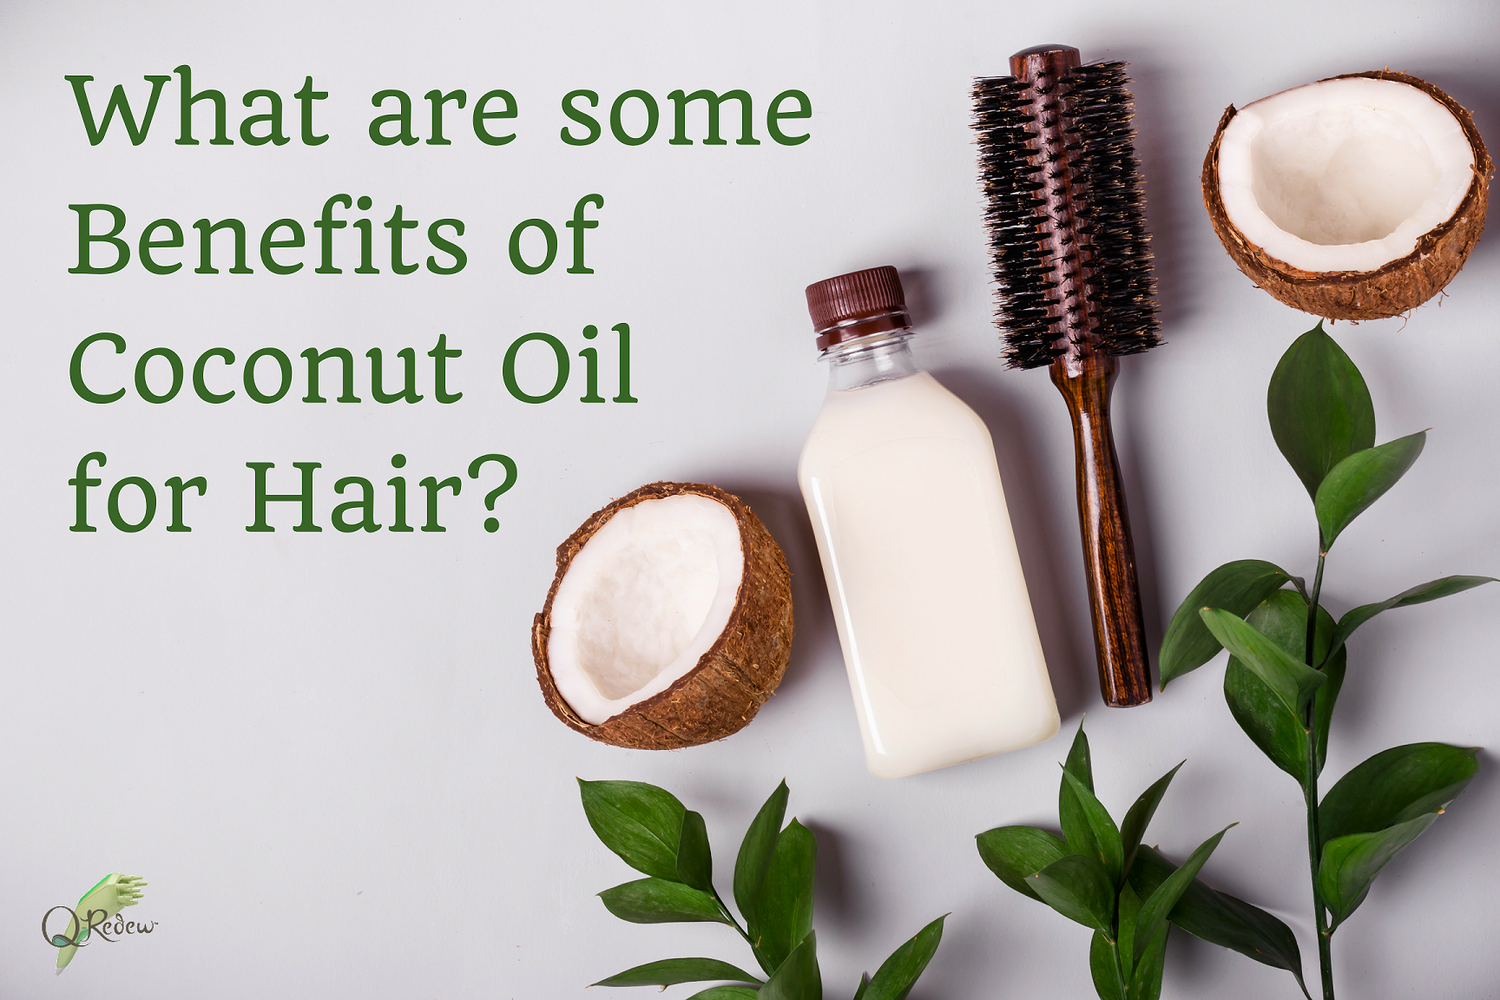 What are Some Benefits of Coconut Oil for Hair?